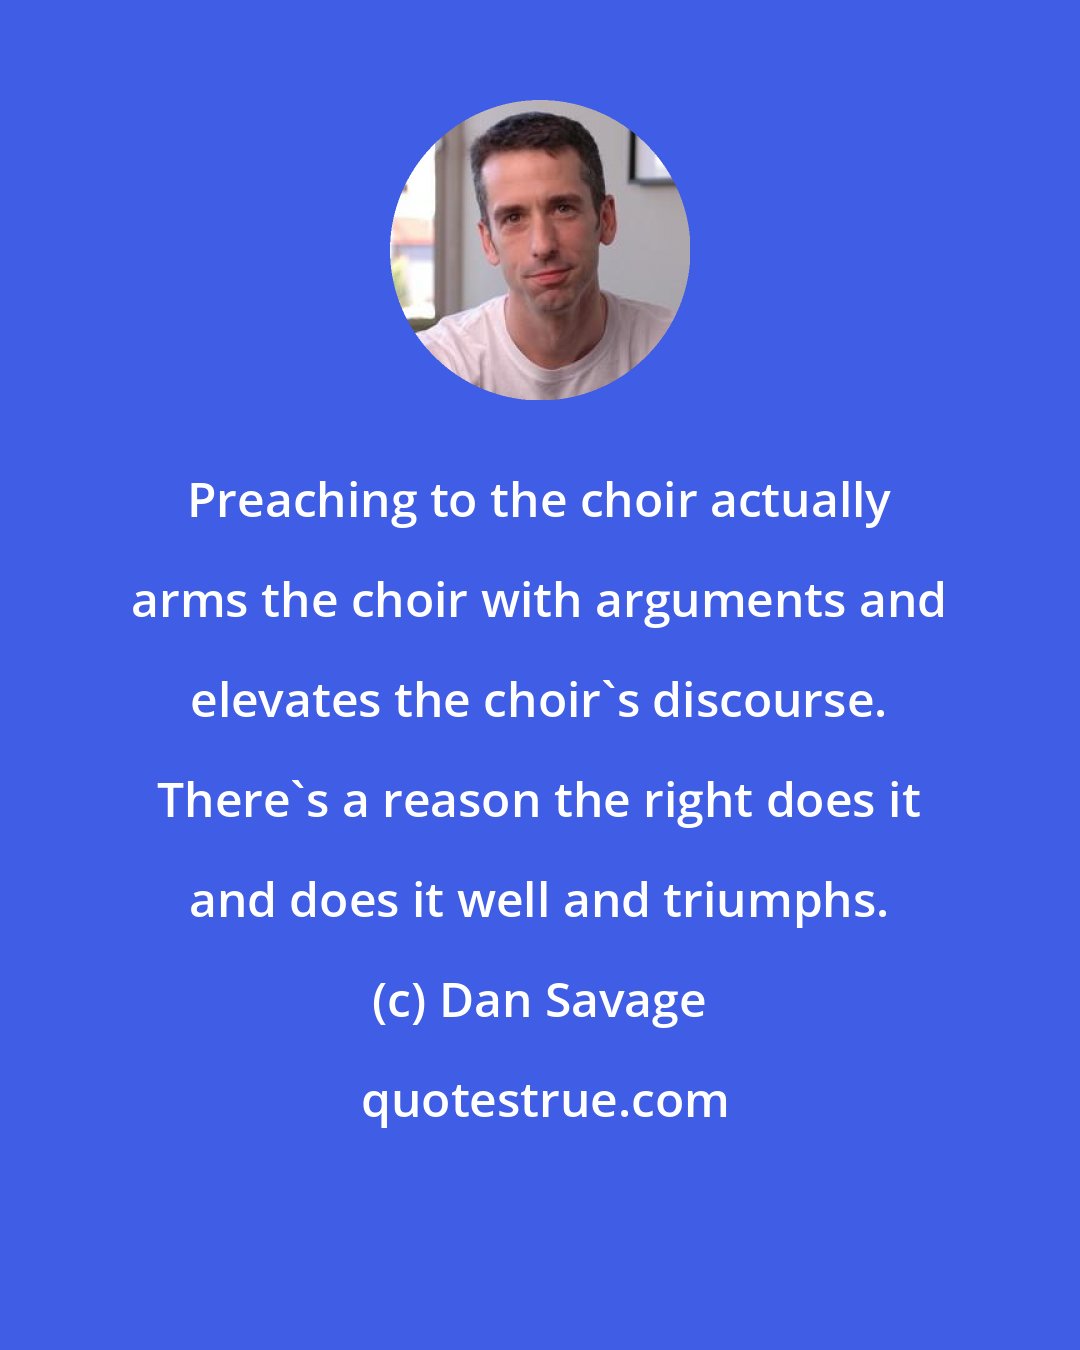 Dan Savage: Preaching to the choir actually arms the choir with arguments and elevates the choir's discourse. There's a reason the right does it and does it well and triumphs.